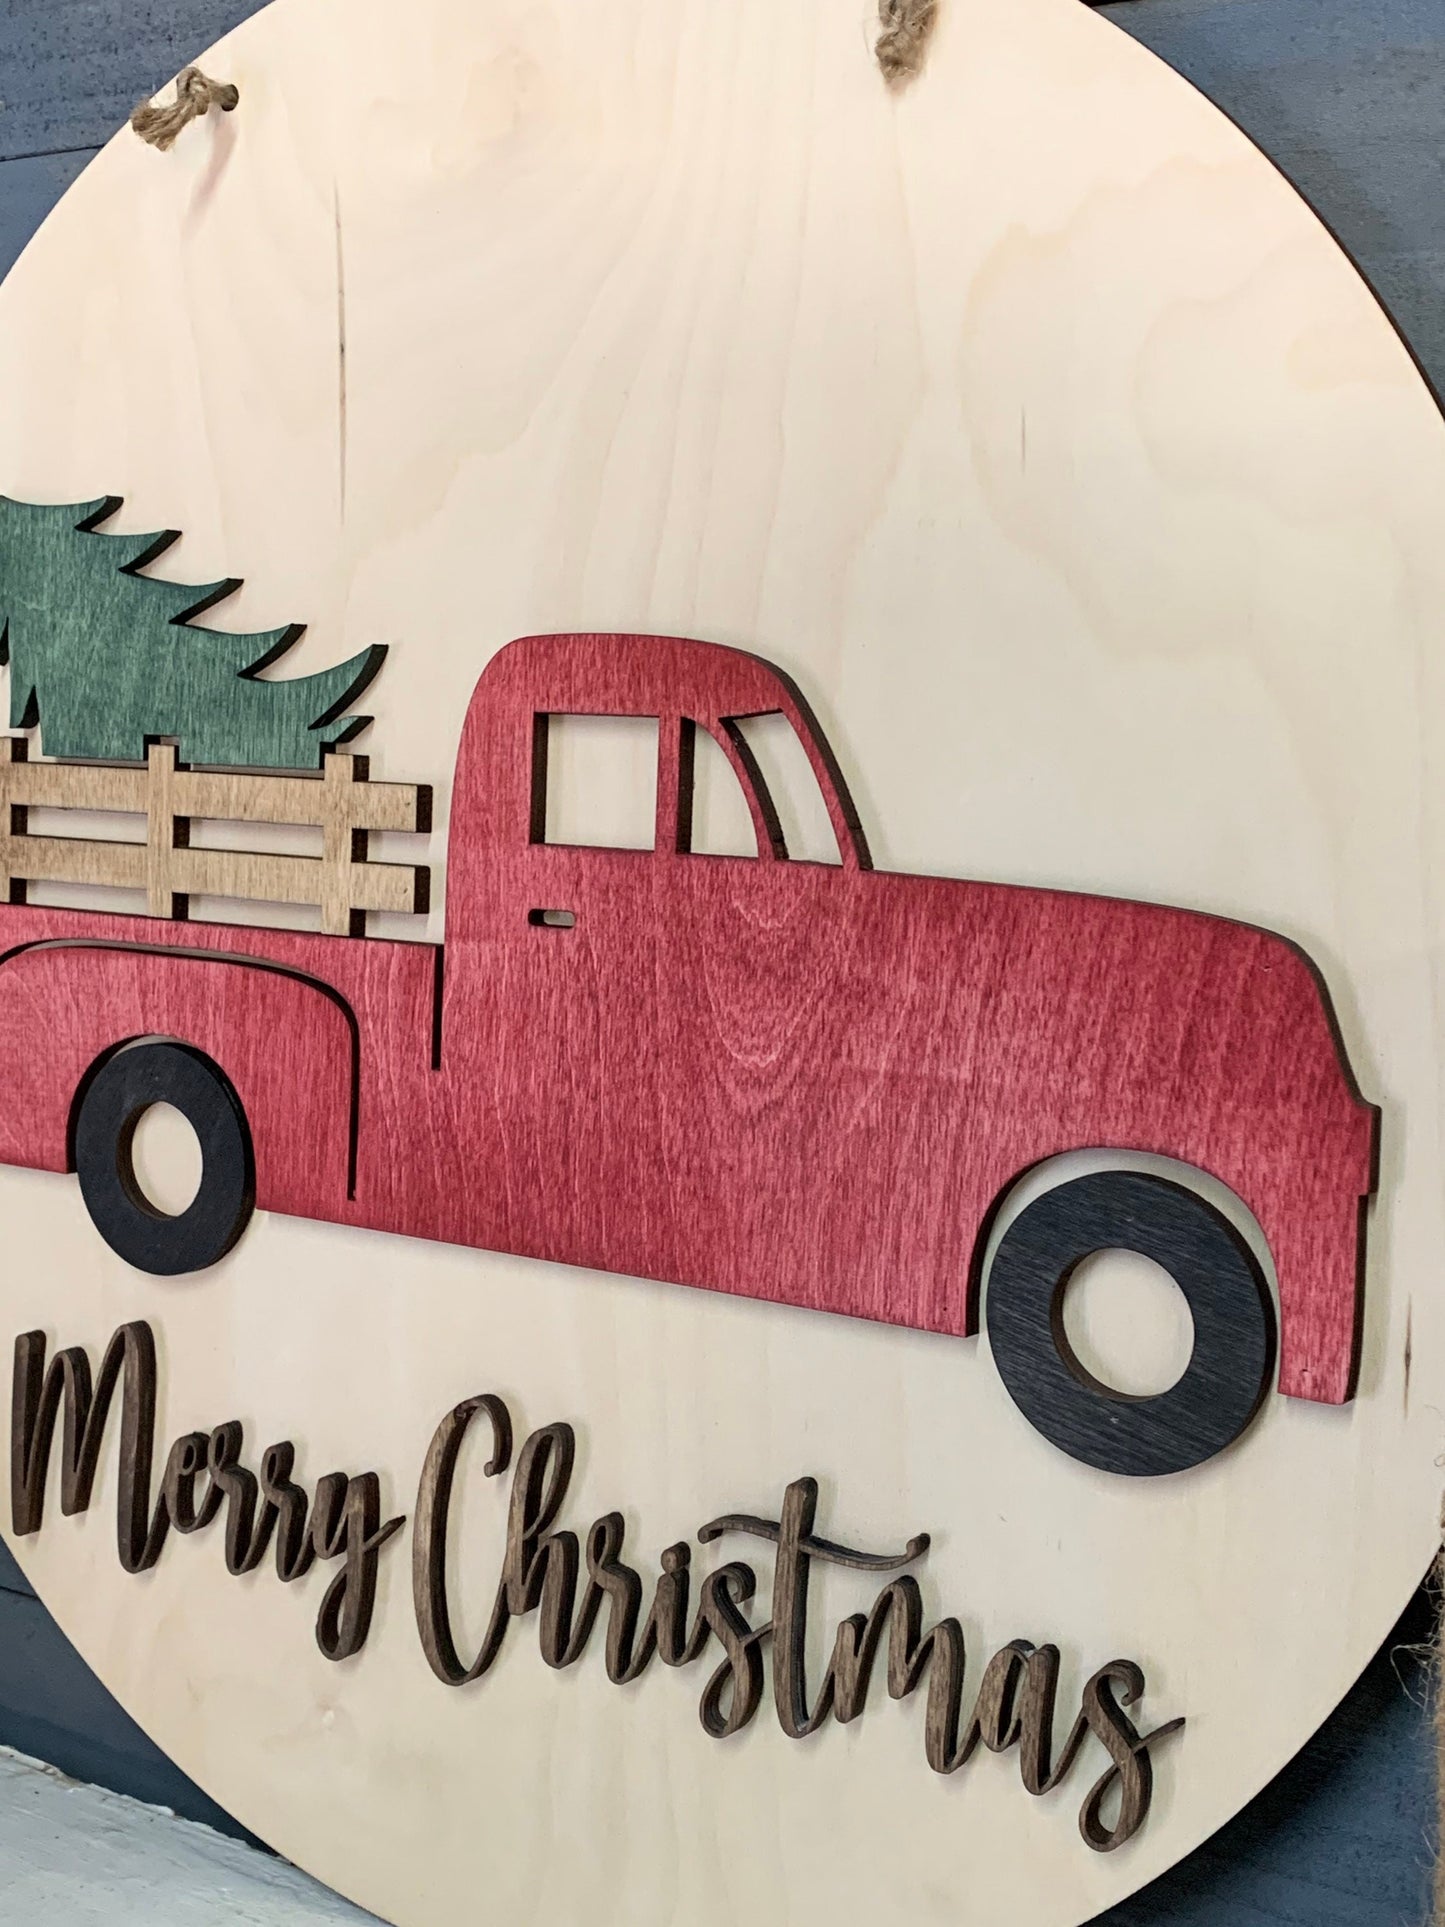 Vintage Truck with a Christmas Tree